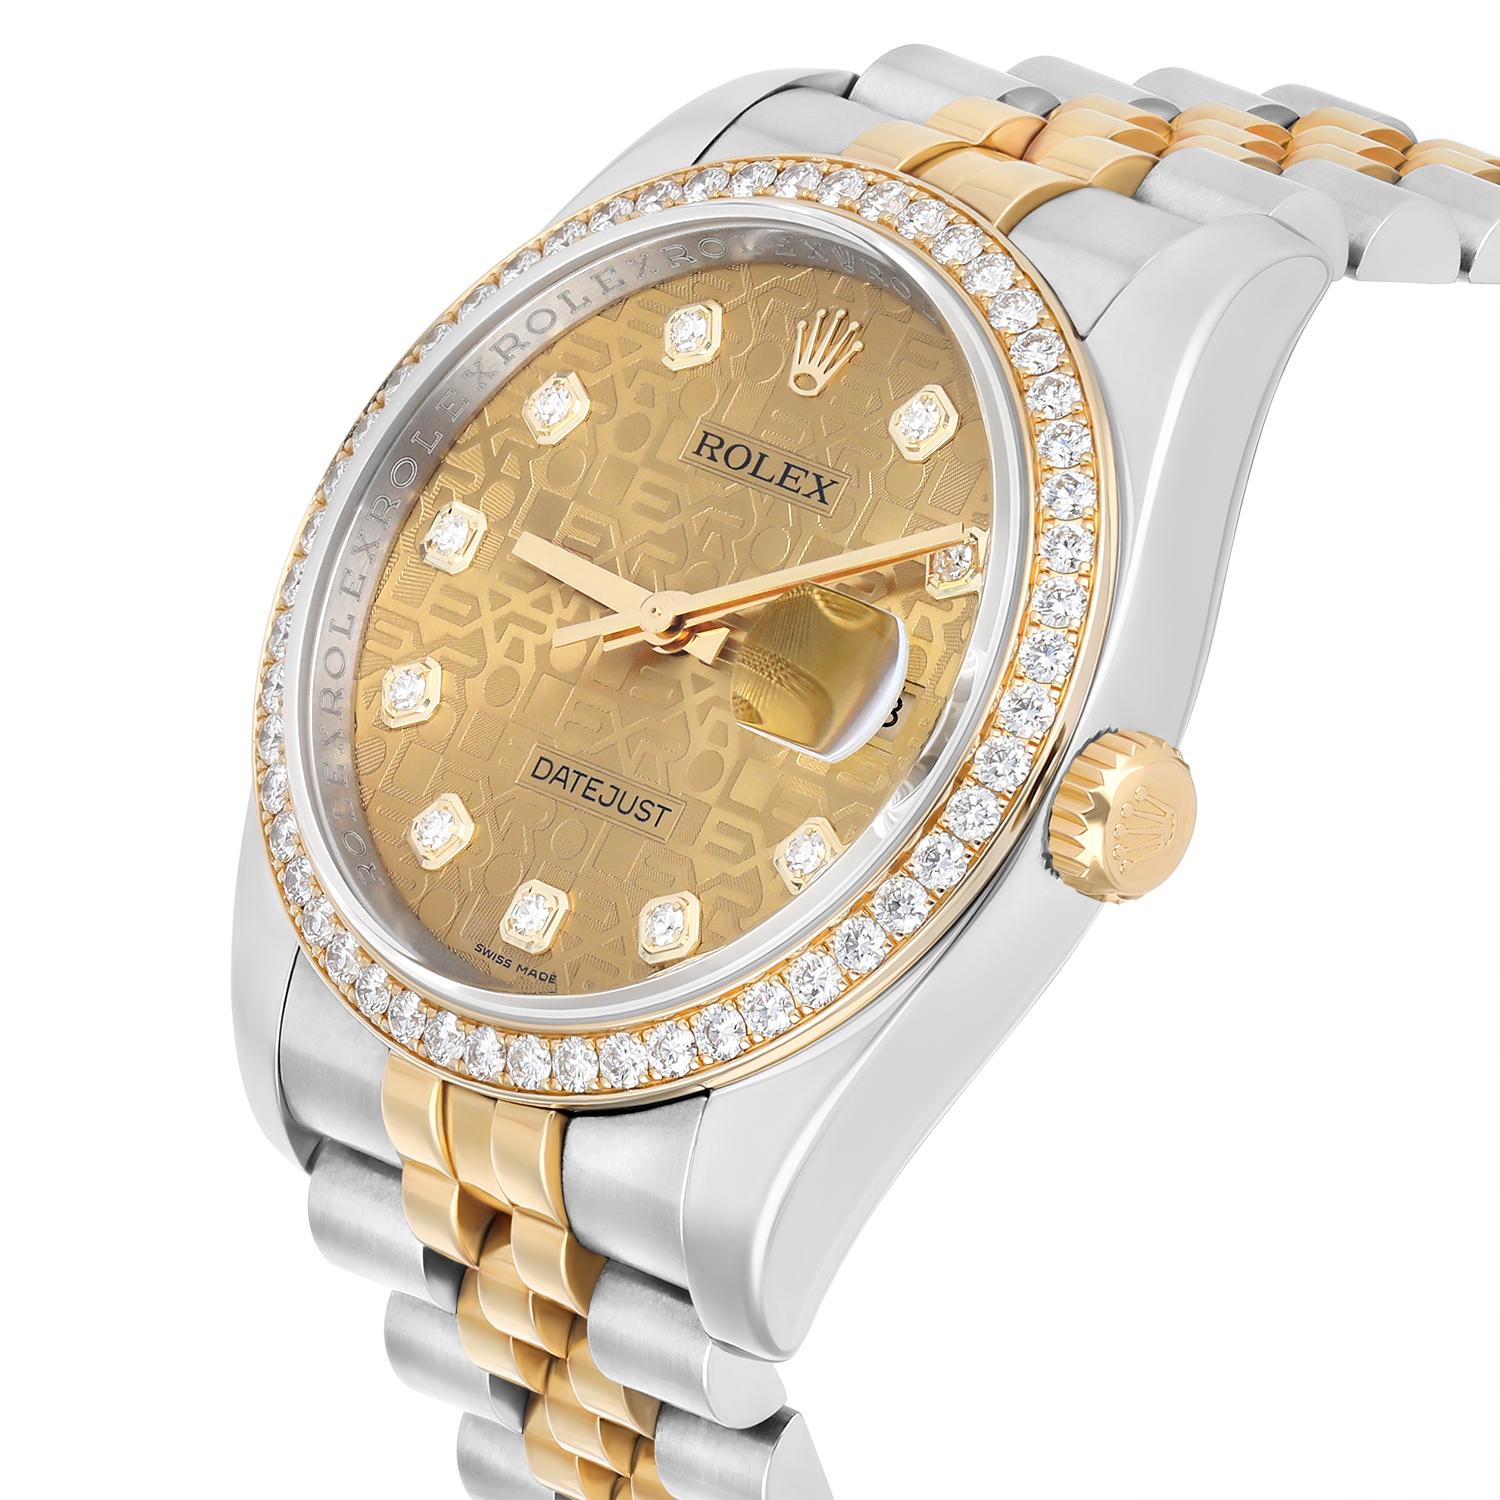 Rolex Datejust 36mm Yellow Gold & Steel Champagne Jubilee Diamond Dial 116243 For Sale 2